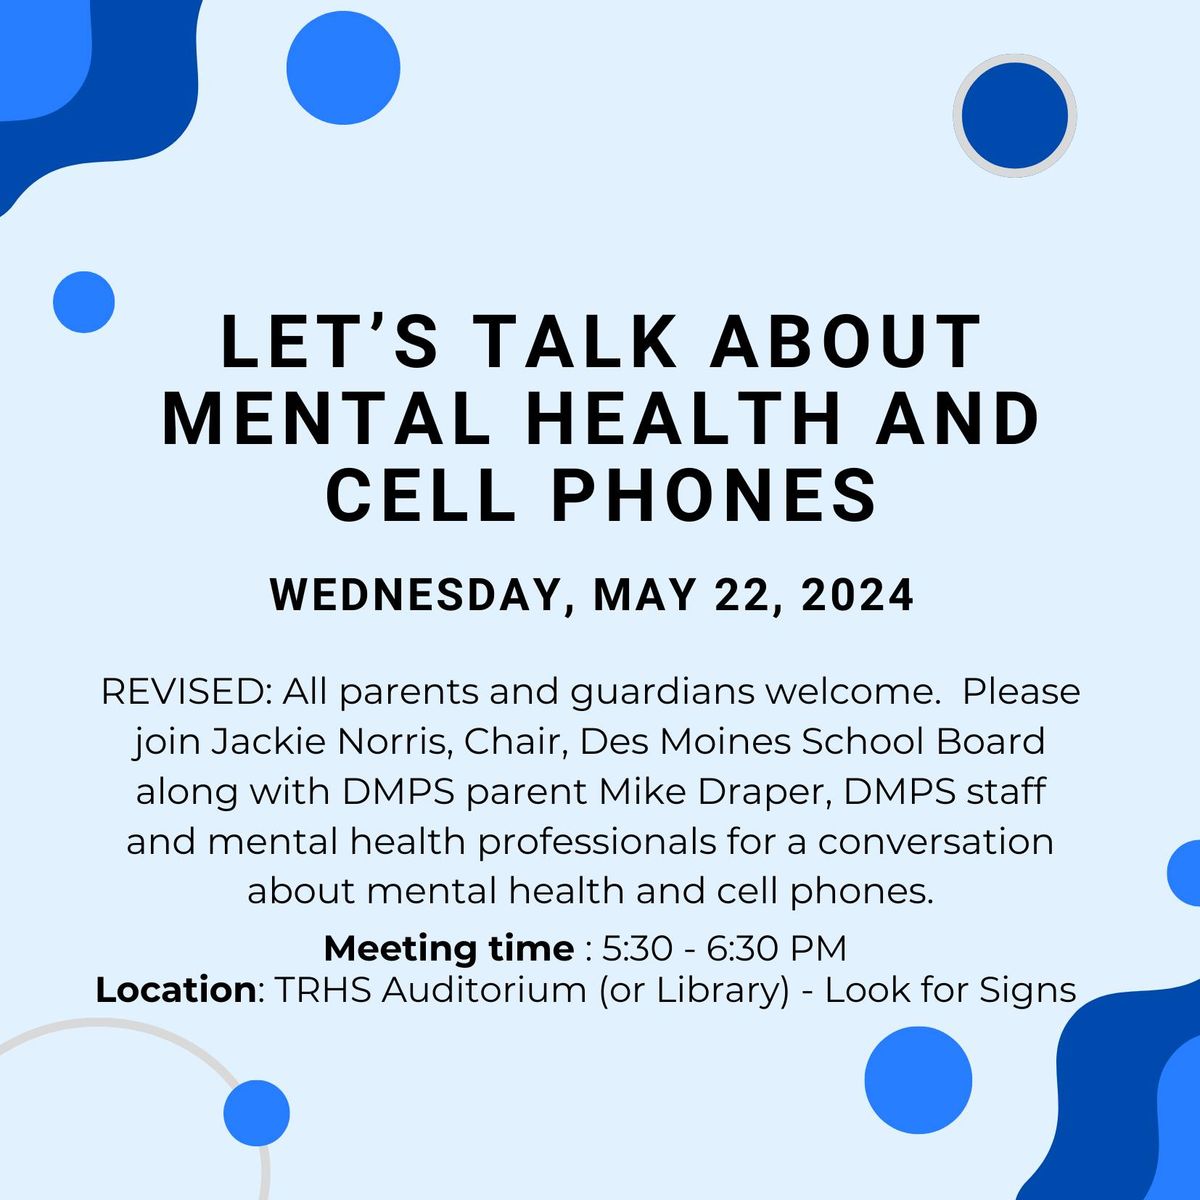 Let's Talk about Mental Health and Cell Phones